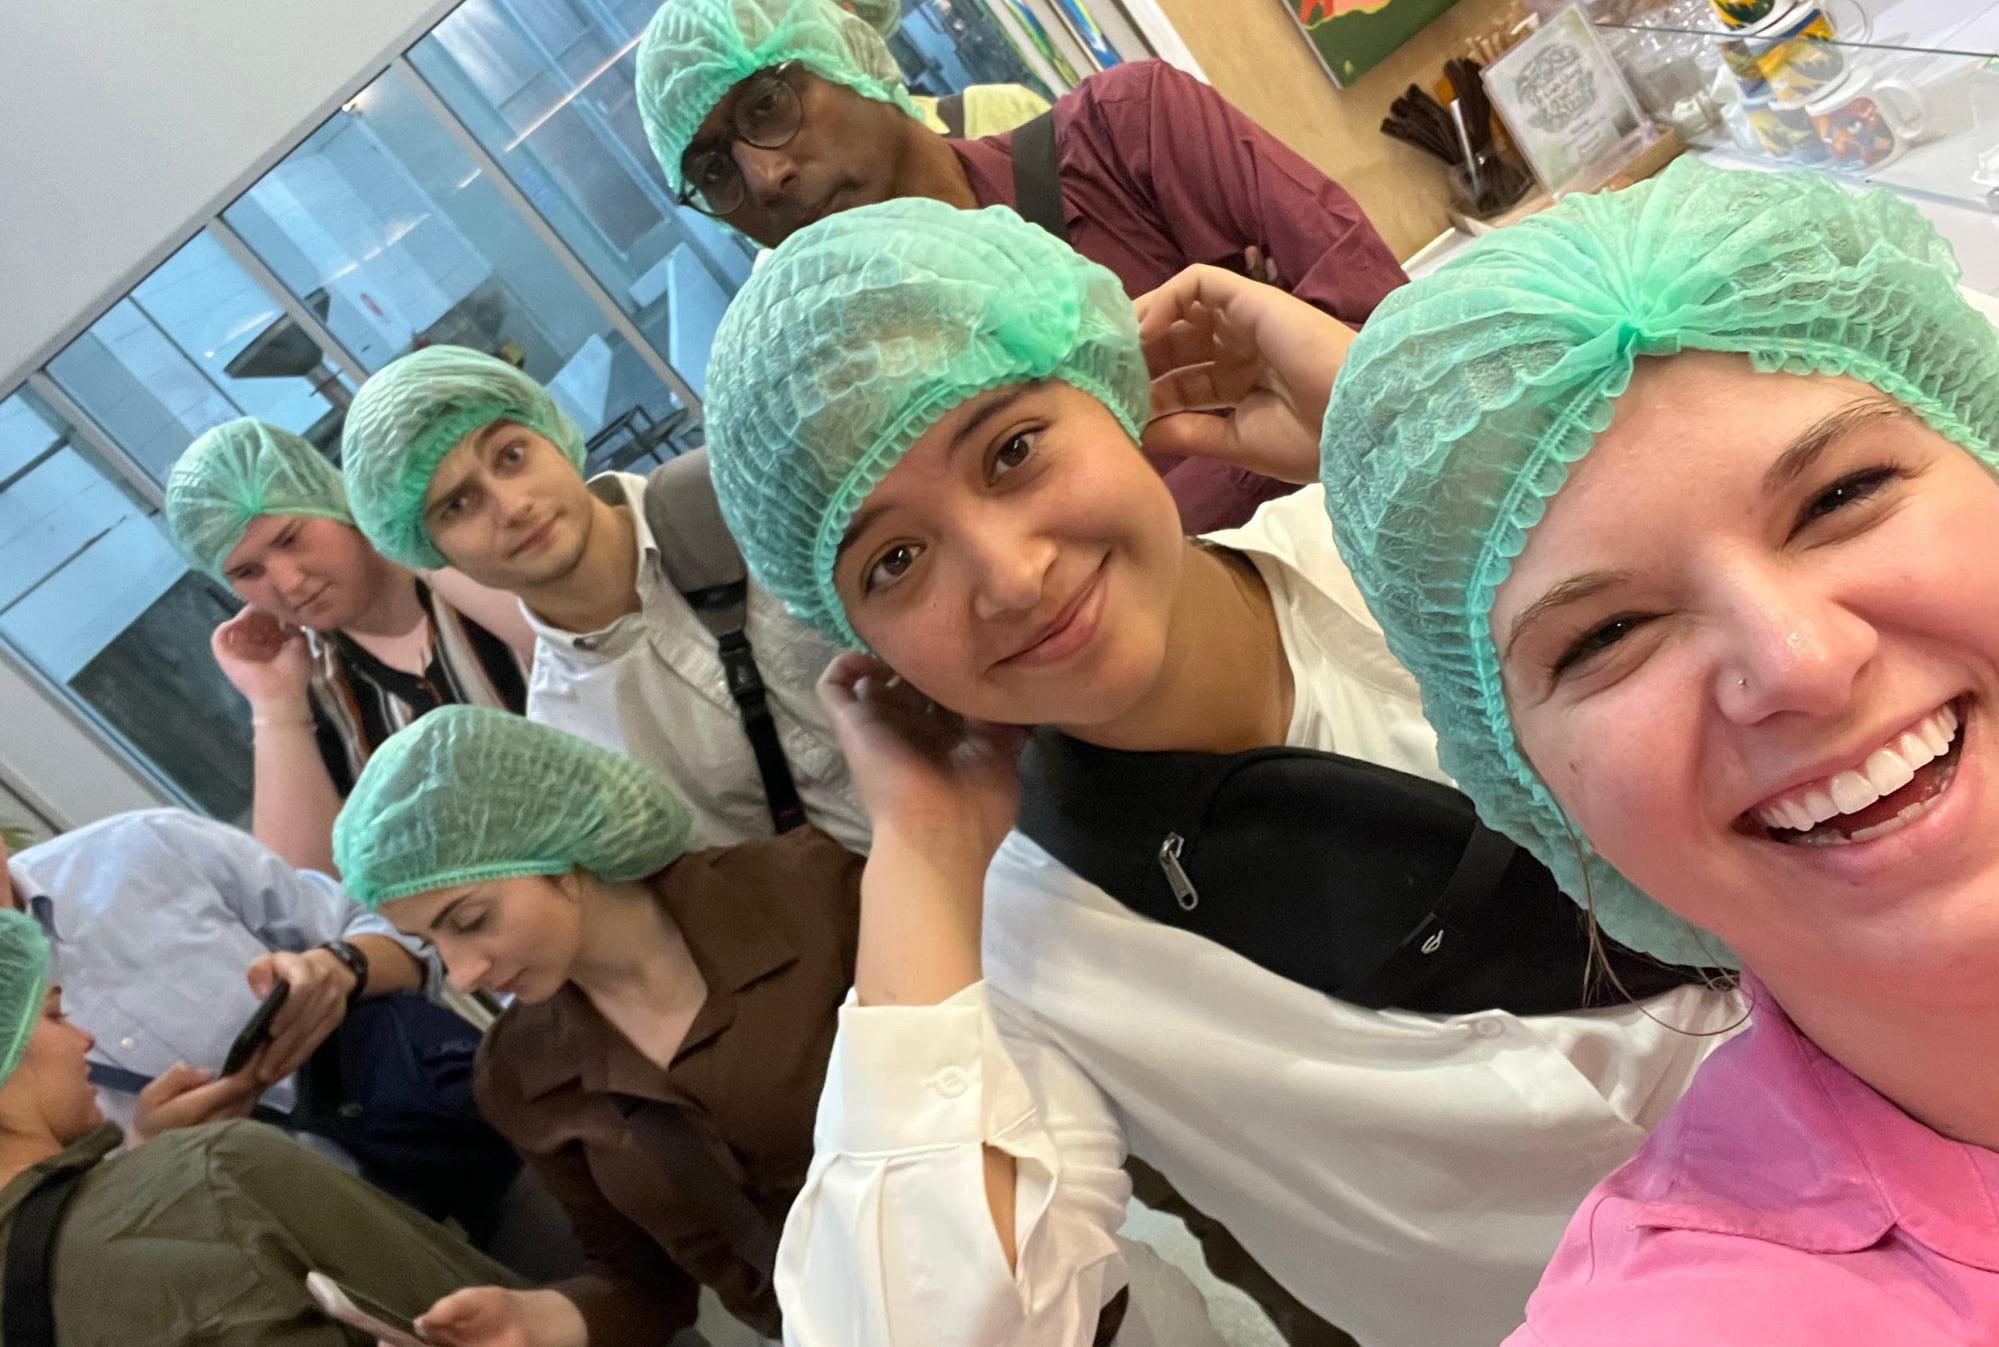 We had to get our hair all covered at the chocolate factory so customers wouldn’t get a little surprise in their candy bars. We toured their new factory where they shell and grind the cacao beans, melt, ferment, mix, pour, chill, and package the chocolate.